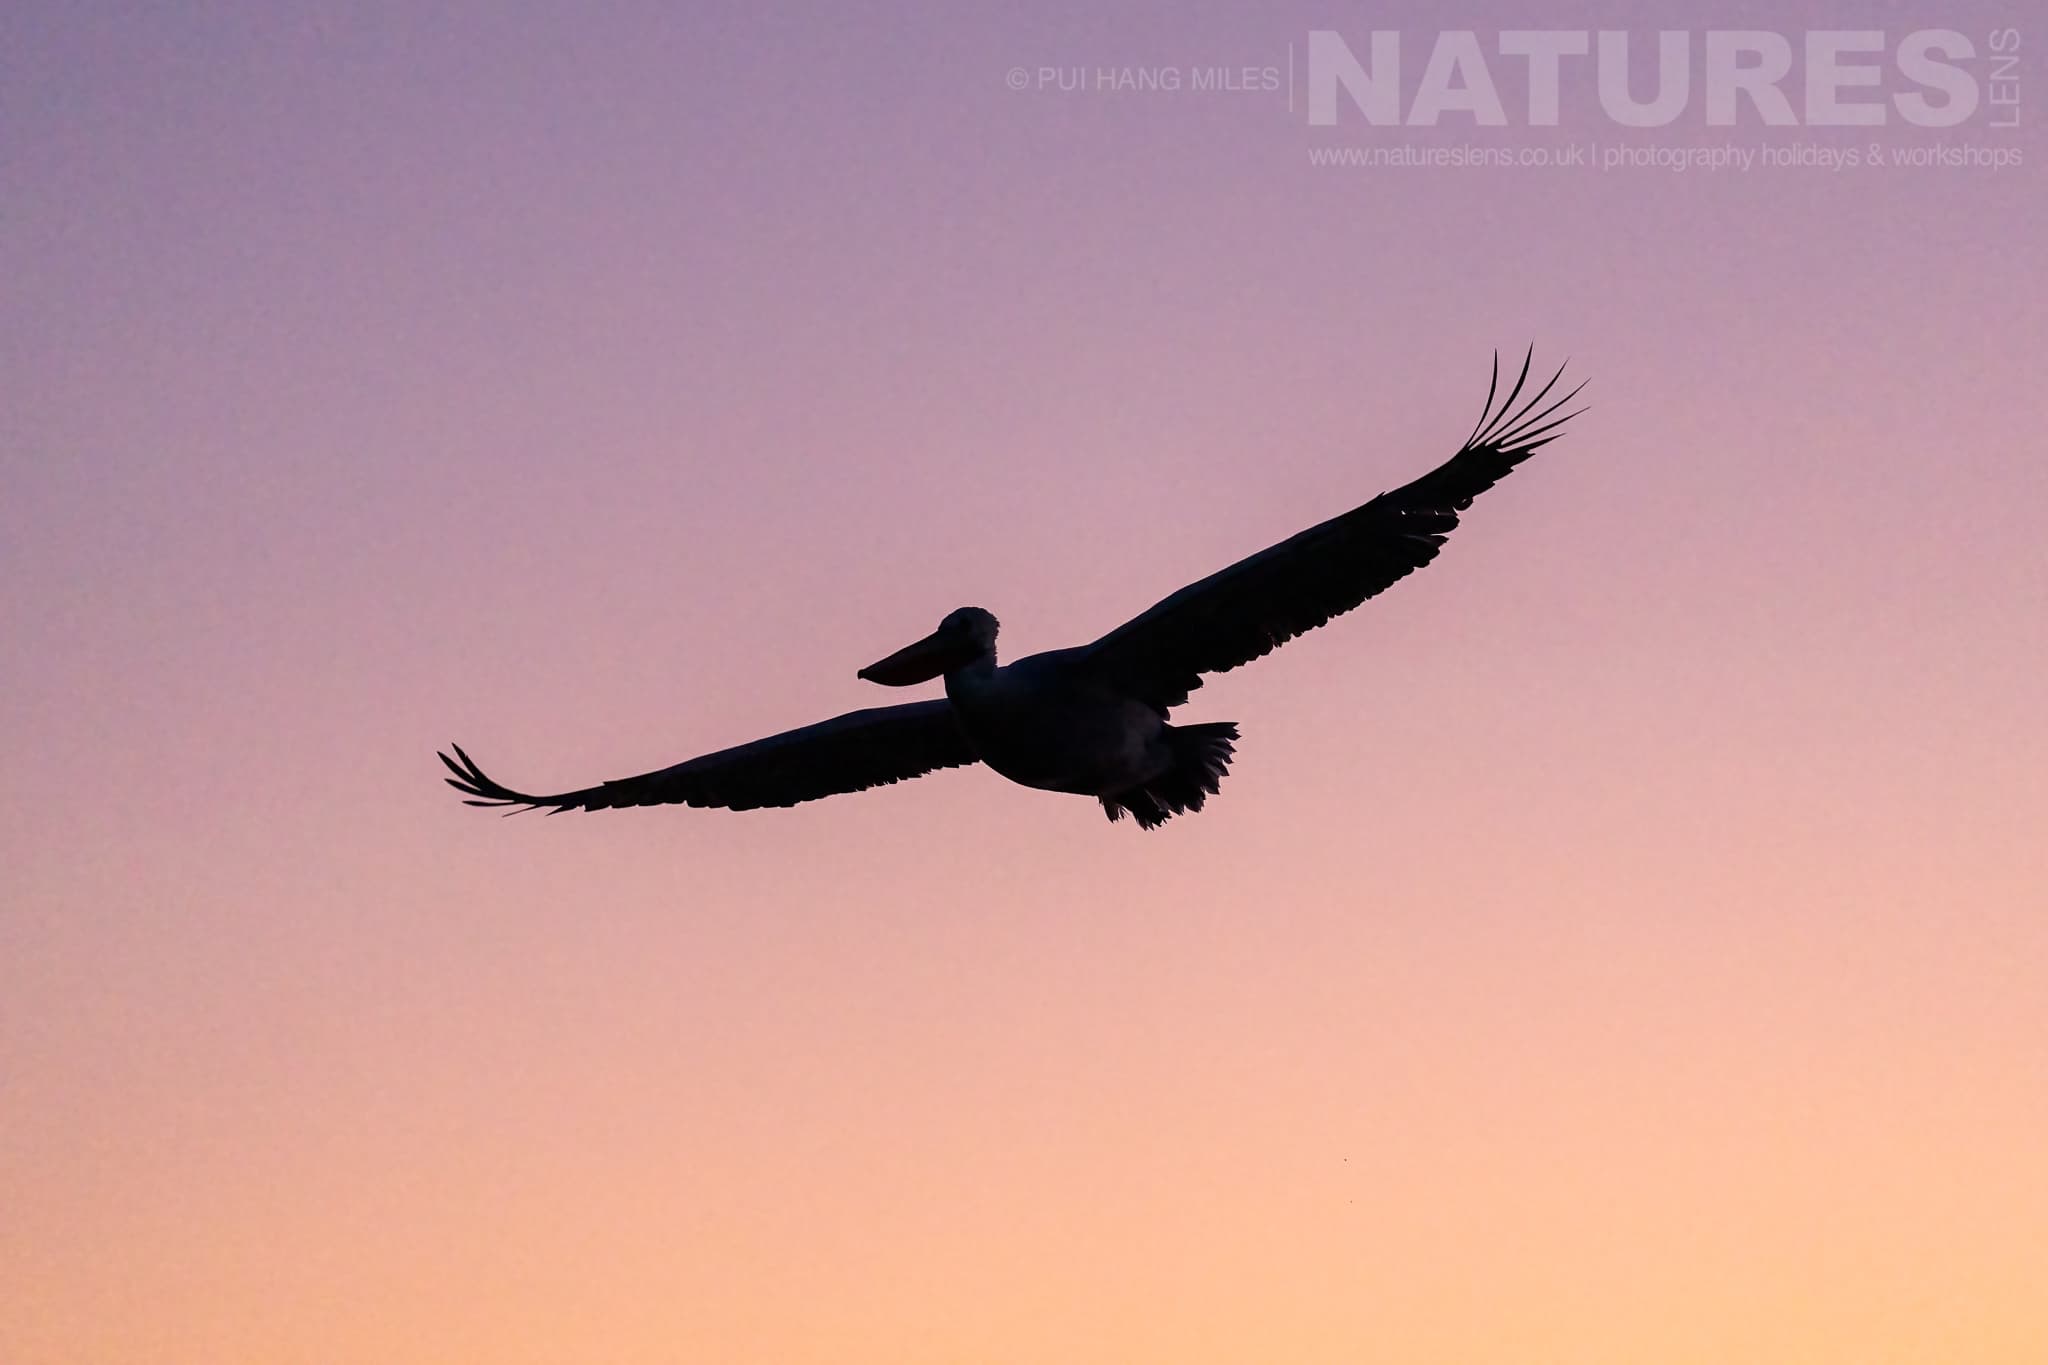 One Of The Pelicans Of Lake Kerkini Flies In The First Light Of The Day Photographed During A Natureslens Pelicans Of Lake Kerkini Photography Holiday